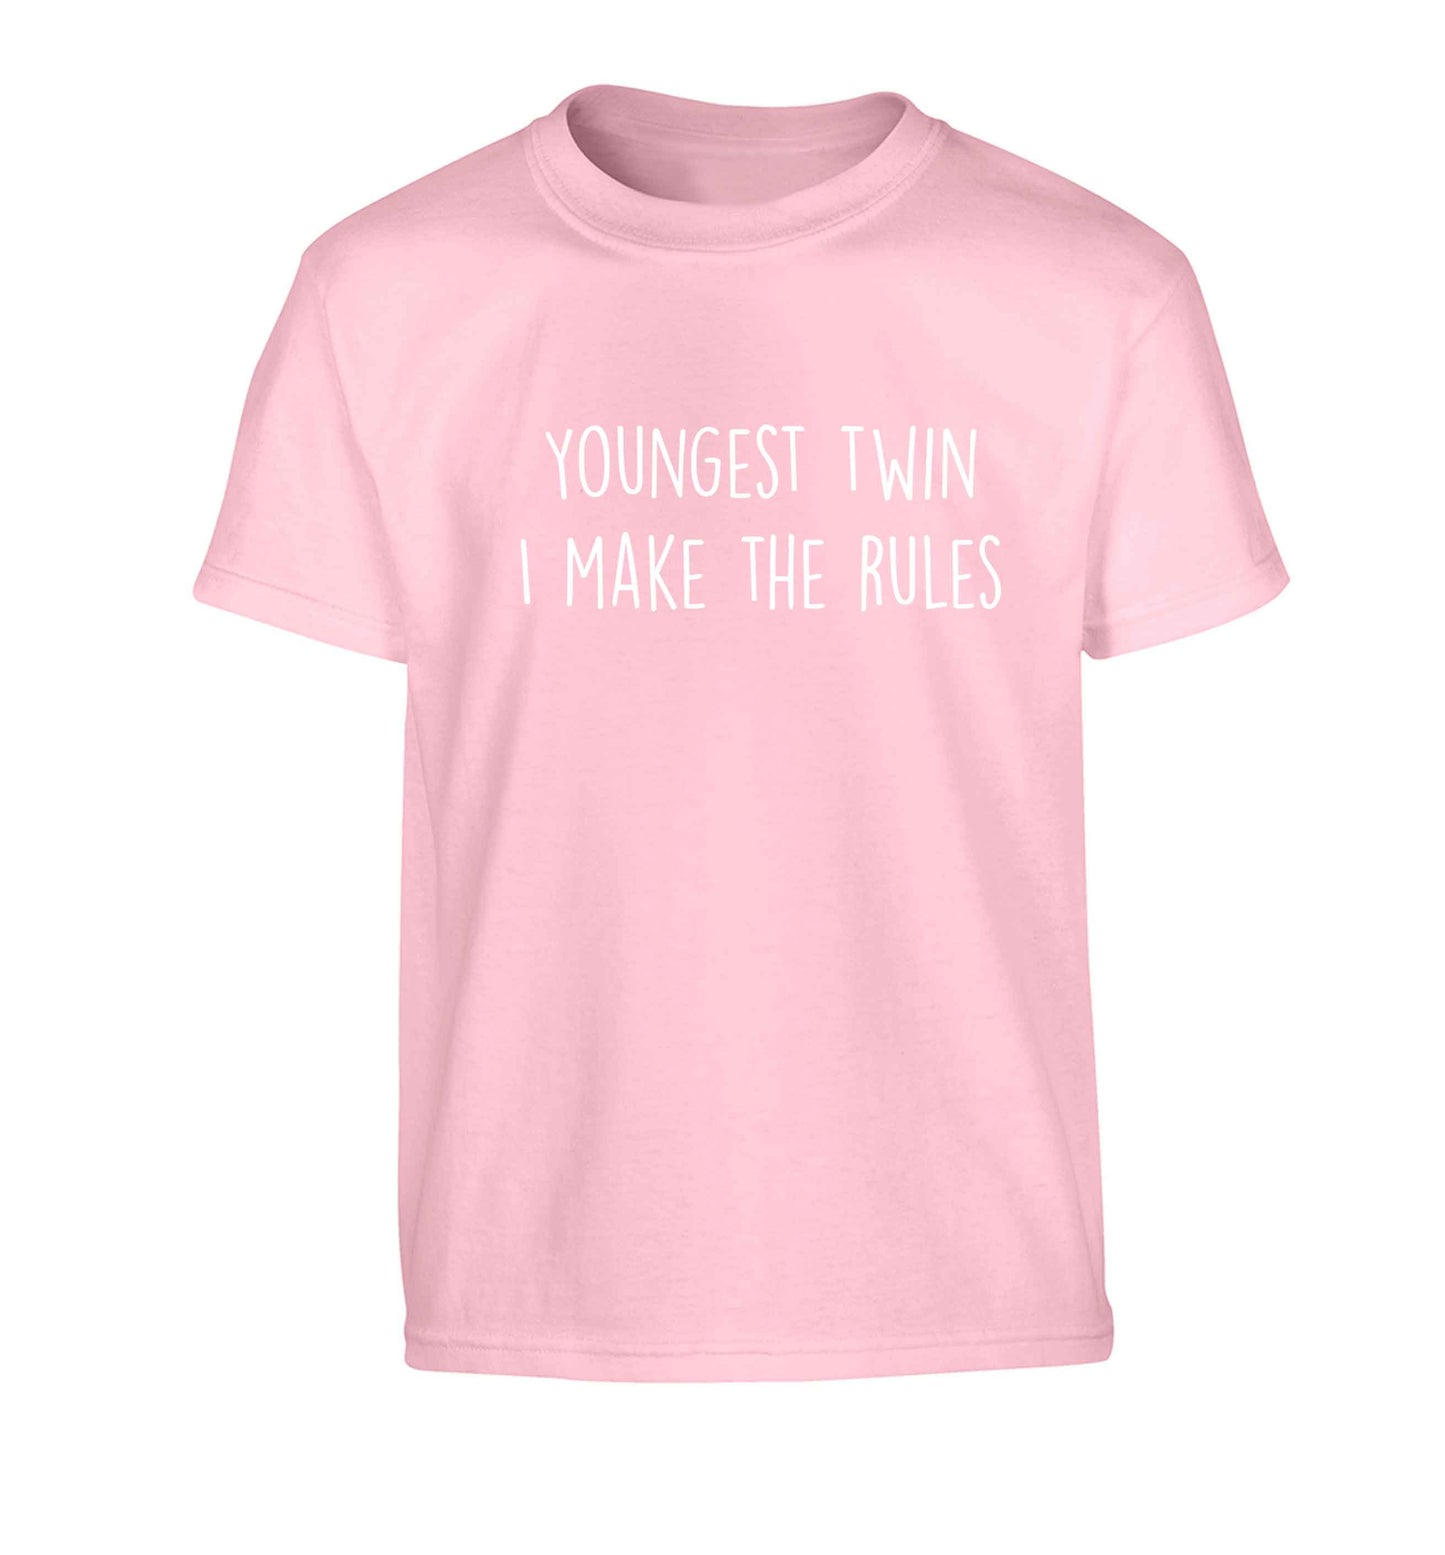 Youngest twin I make the rules Children's light pink Tshirt 12-13 Years